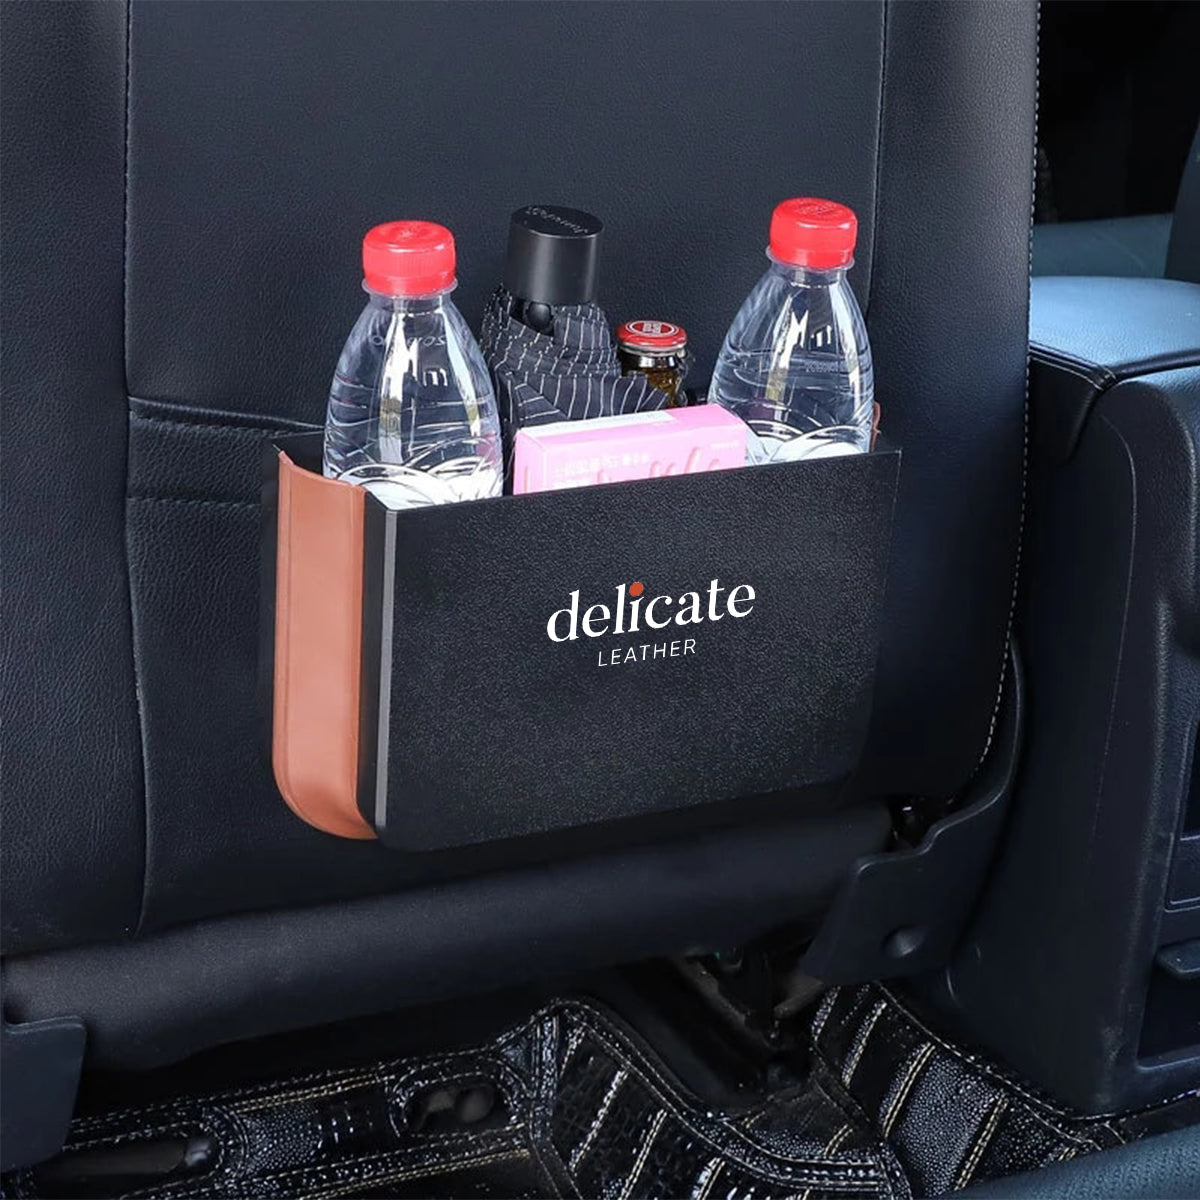 Hanging Waterproof Car Trash can-Foldable, Custom For Your Cars, Waterproof, and Equipped with Cup Holders and Trays. Multi-Purpose, Car Accessories TS11992 - Delicate Leather